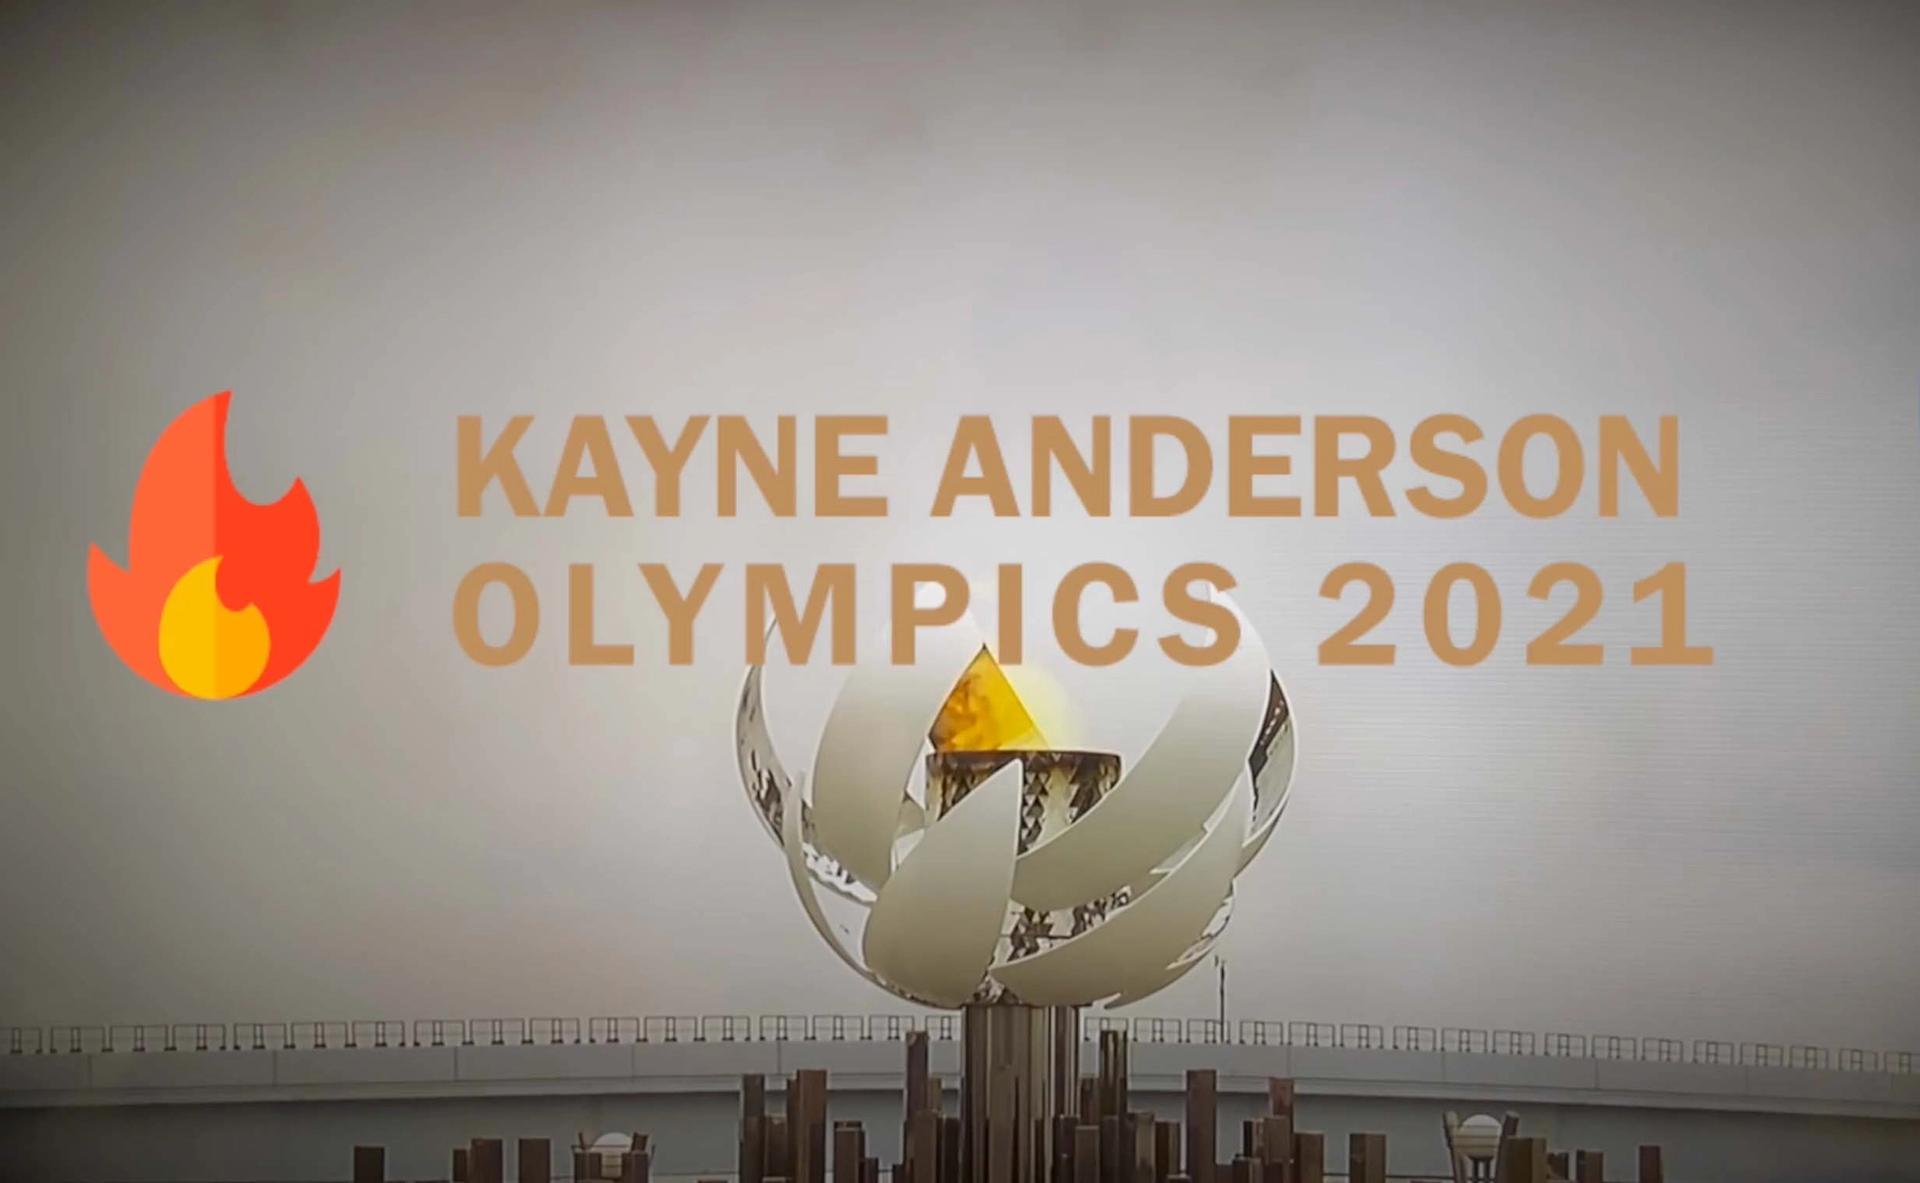 Image of Olympic monument with superimposed text that says: "Kayne Anderson Olympics 2021"